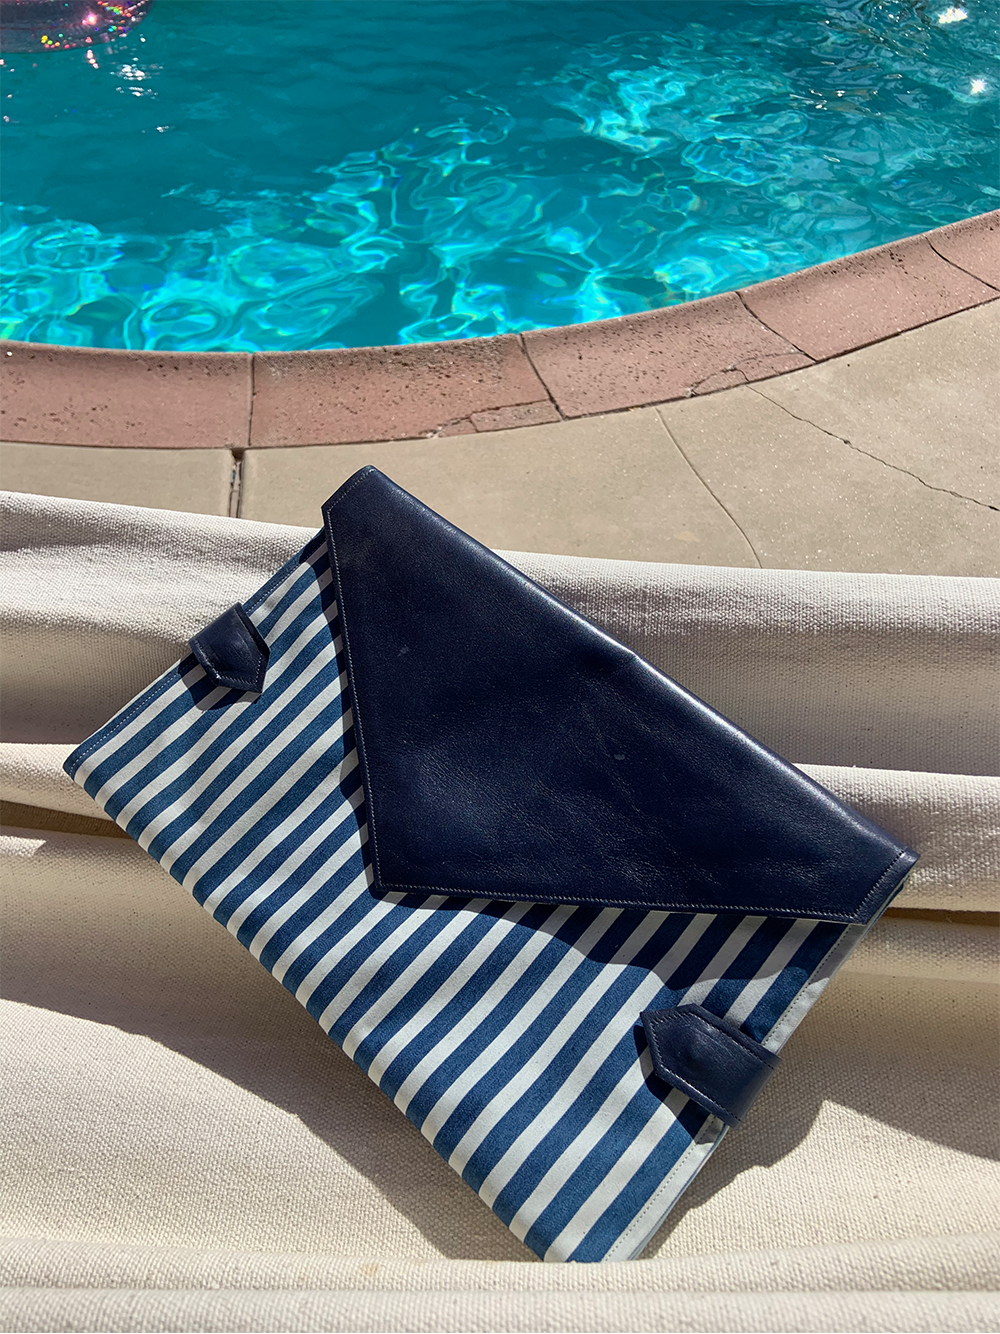 CC - Blue and white striped by the pool.png